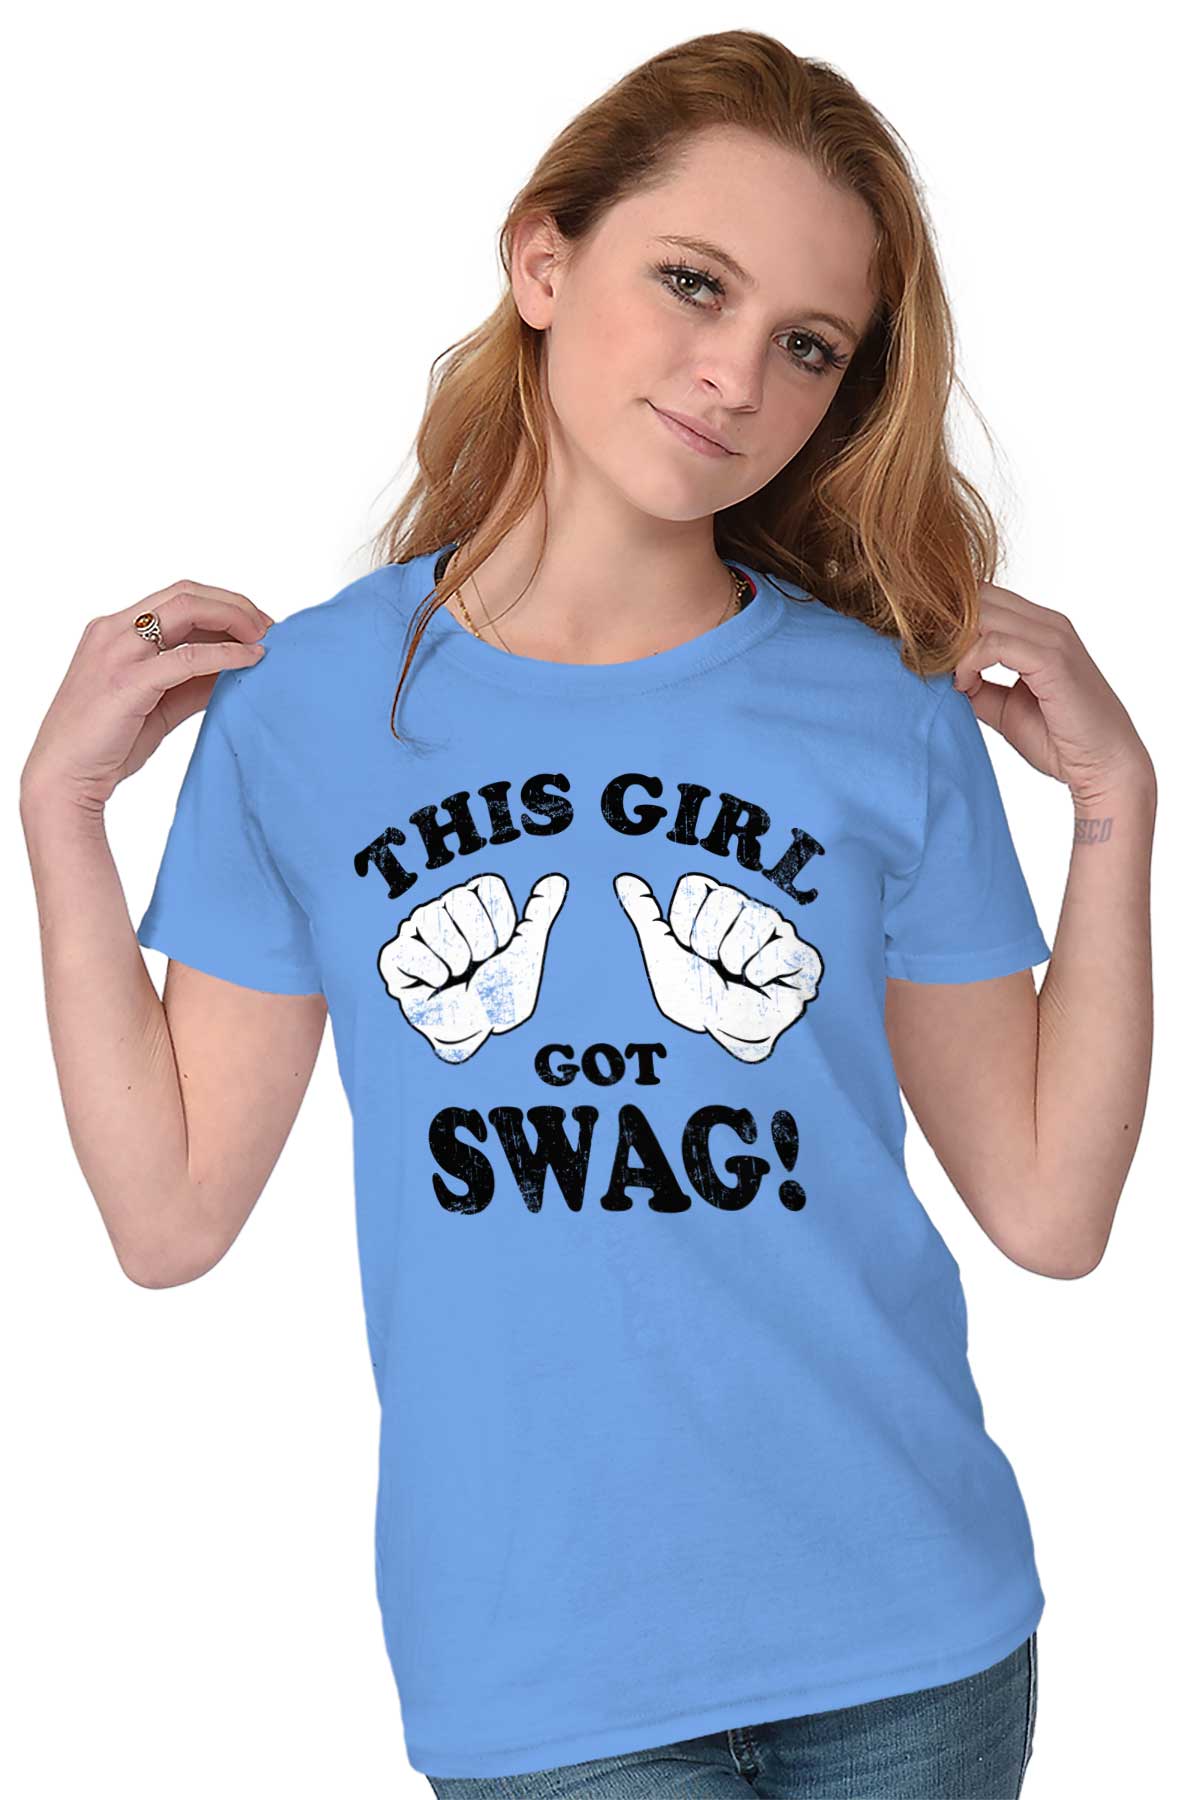 This Girl Got Swag Shirt For Women Funny Swagger